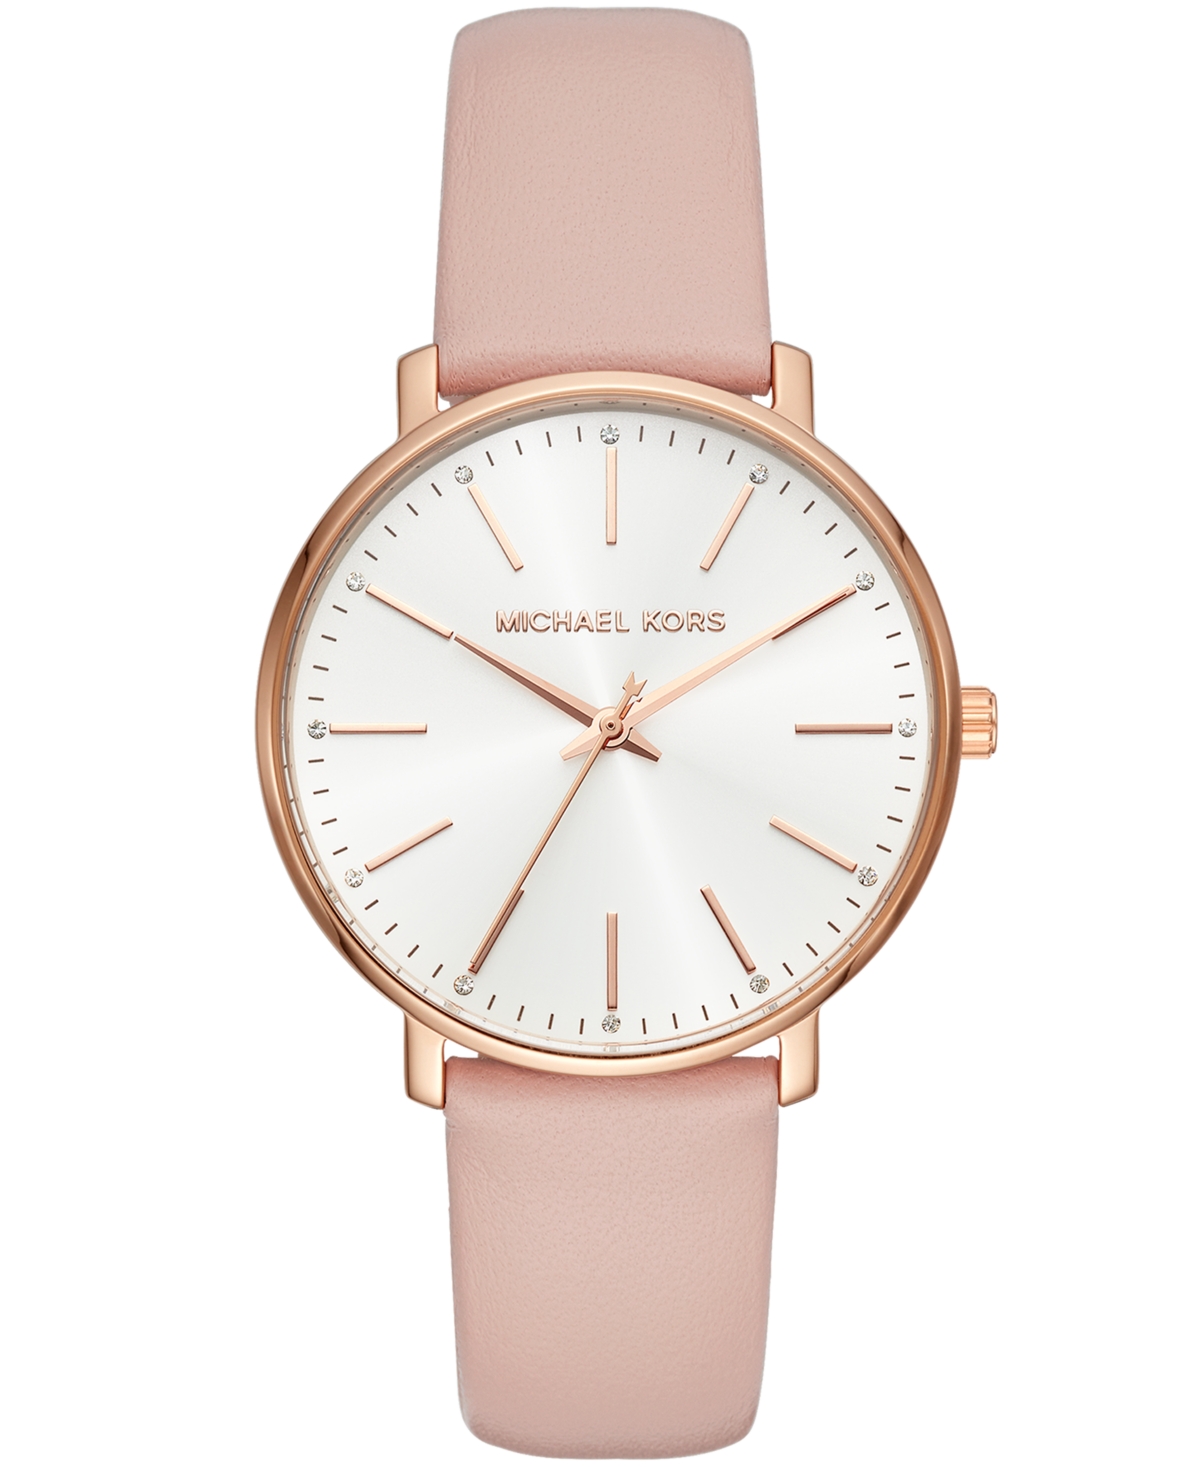 Michael Kors Women's Pyper Blush Leather Strap Watch 38mm & Reviews - All  Watches - Jewelry & Watches - Macy's